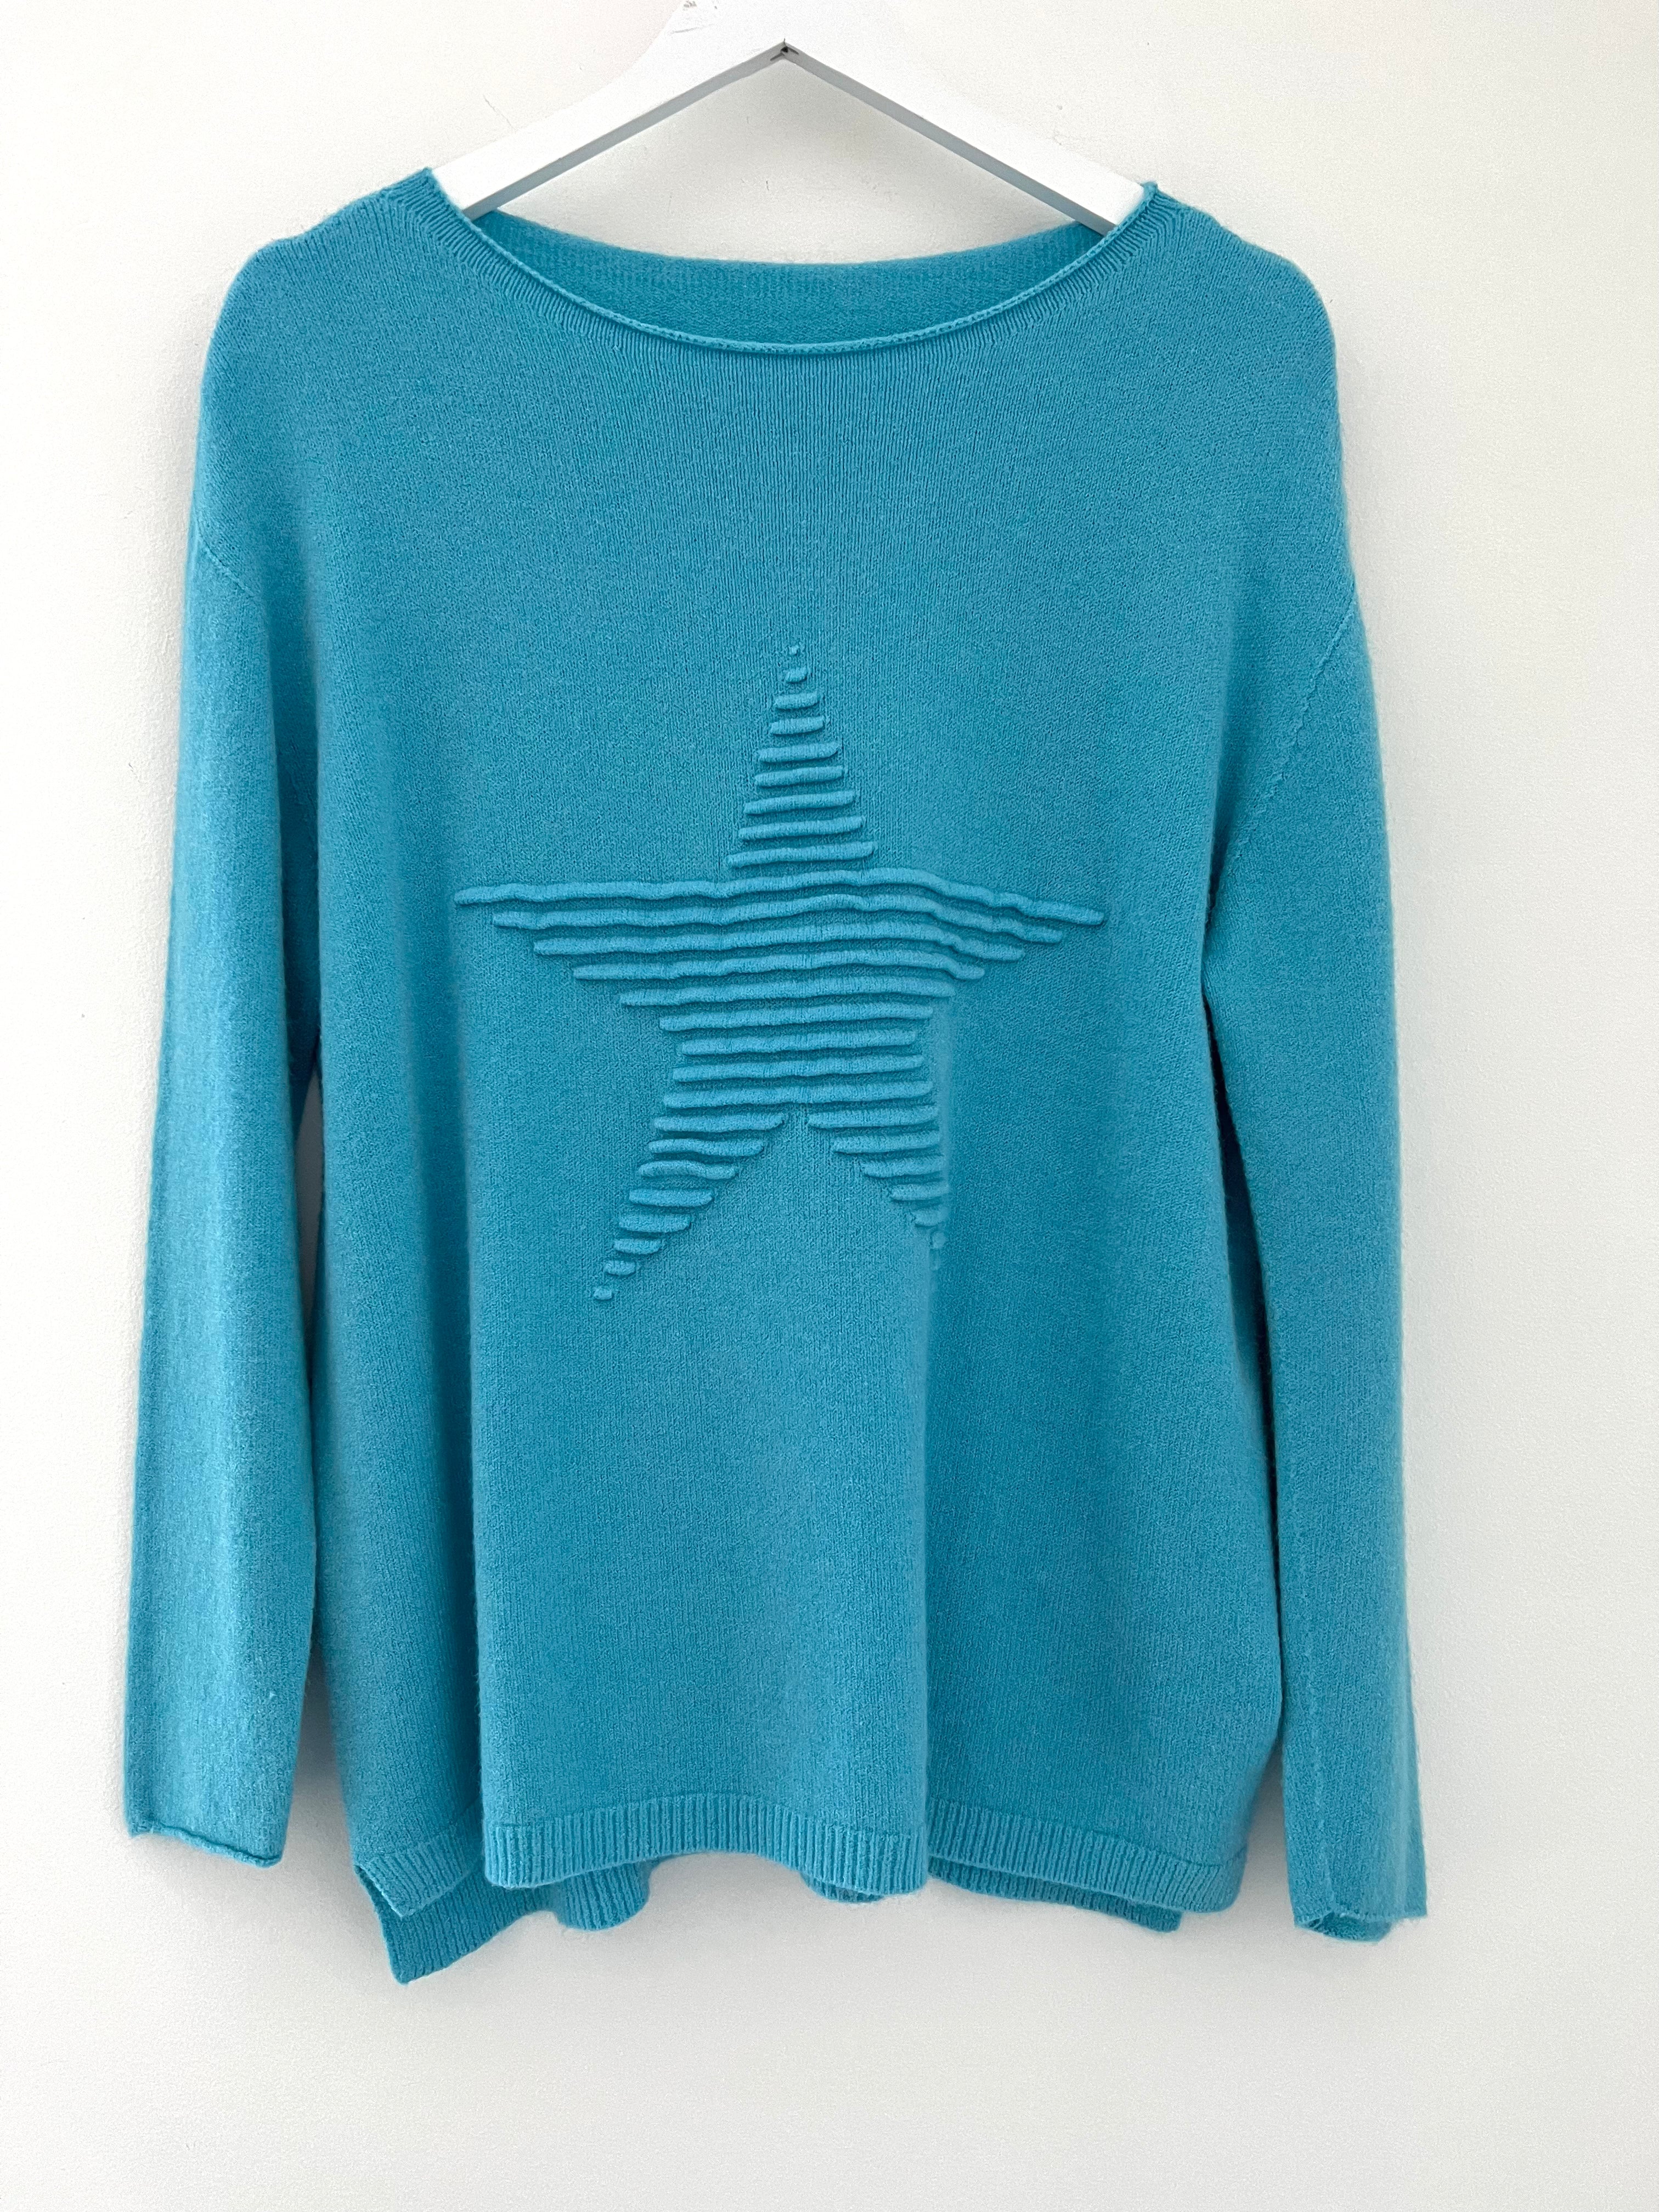 Ribbed Star Jumper in Turquoise Blue